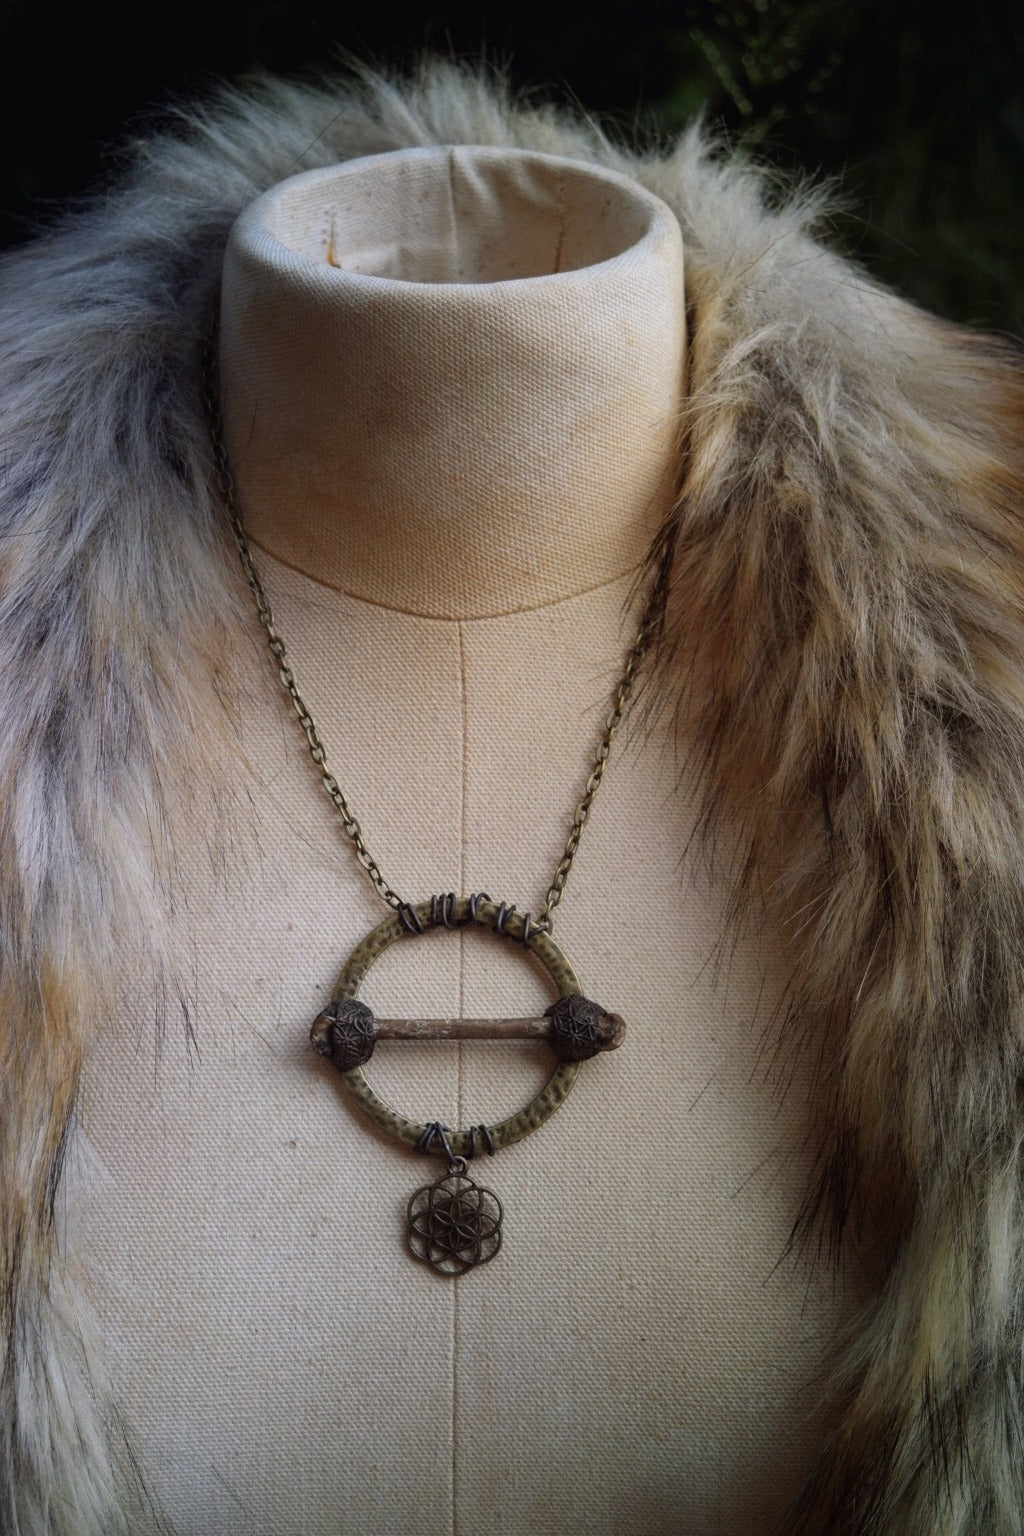 Seed of Life Necklace for Cosmic Consciousness